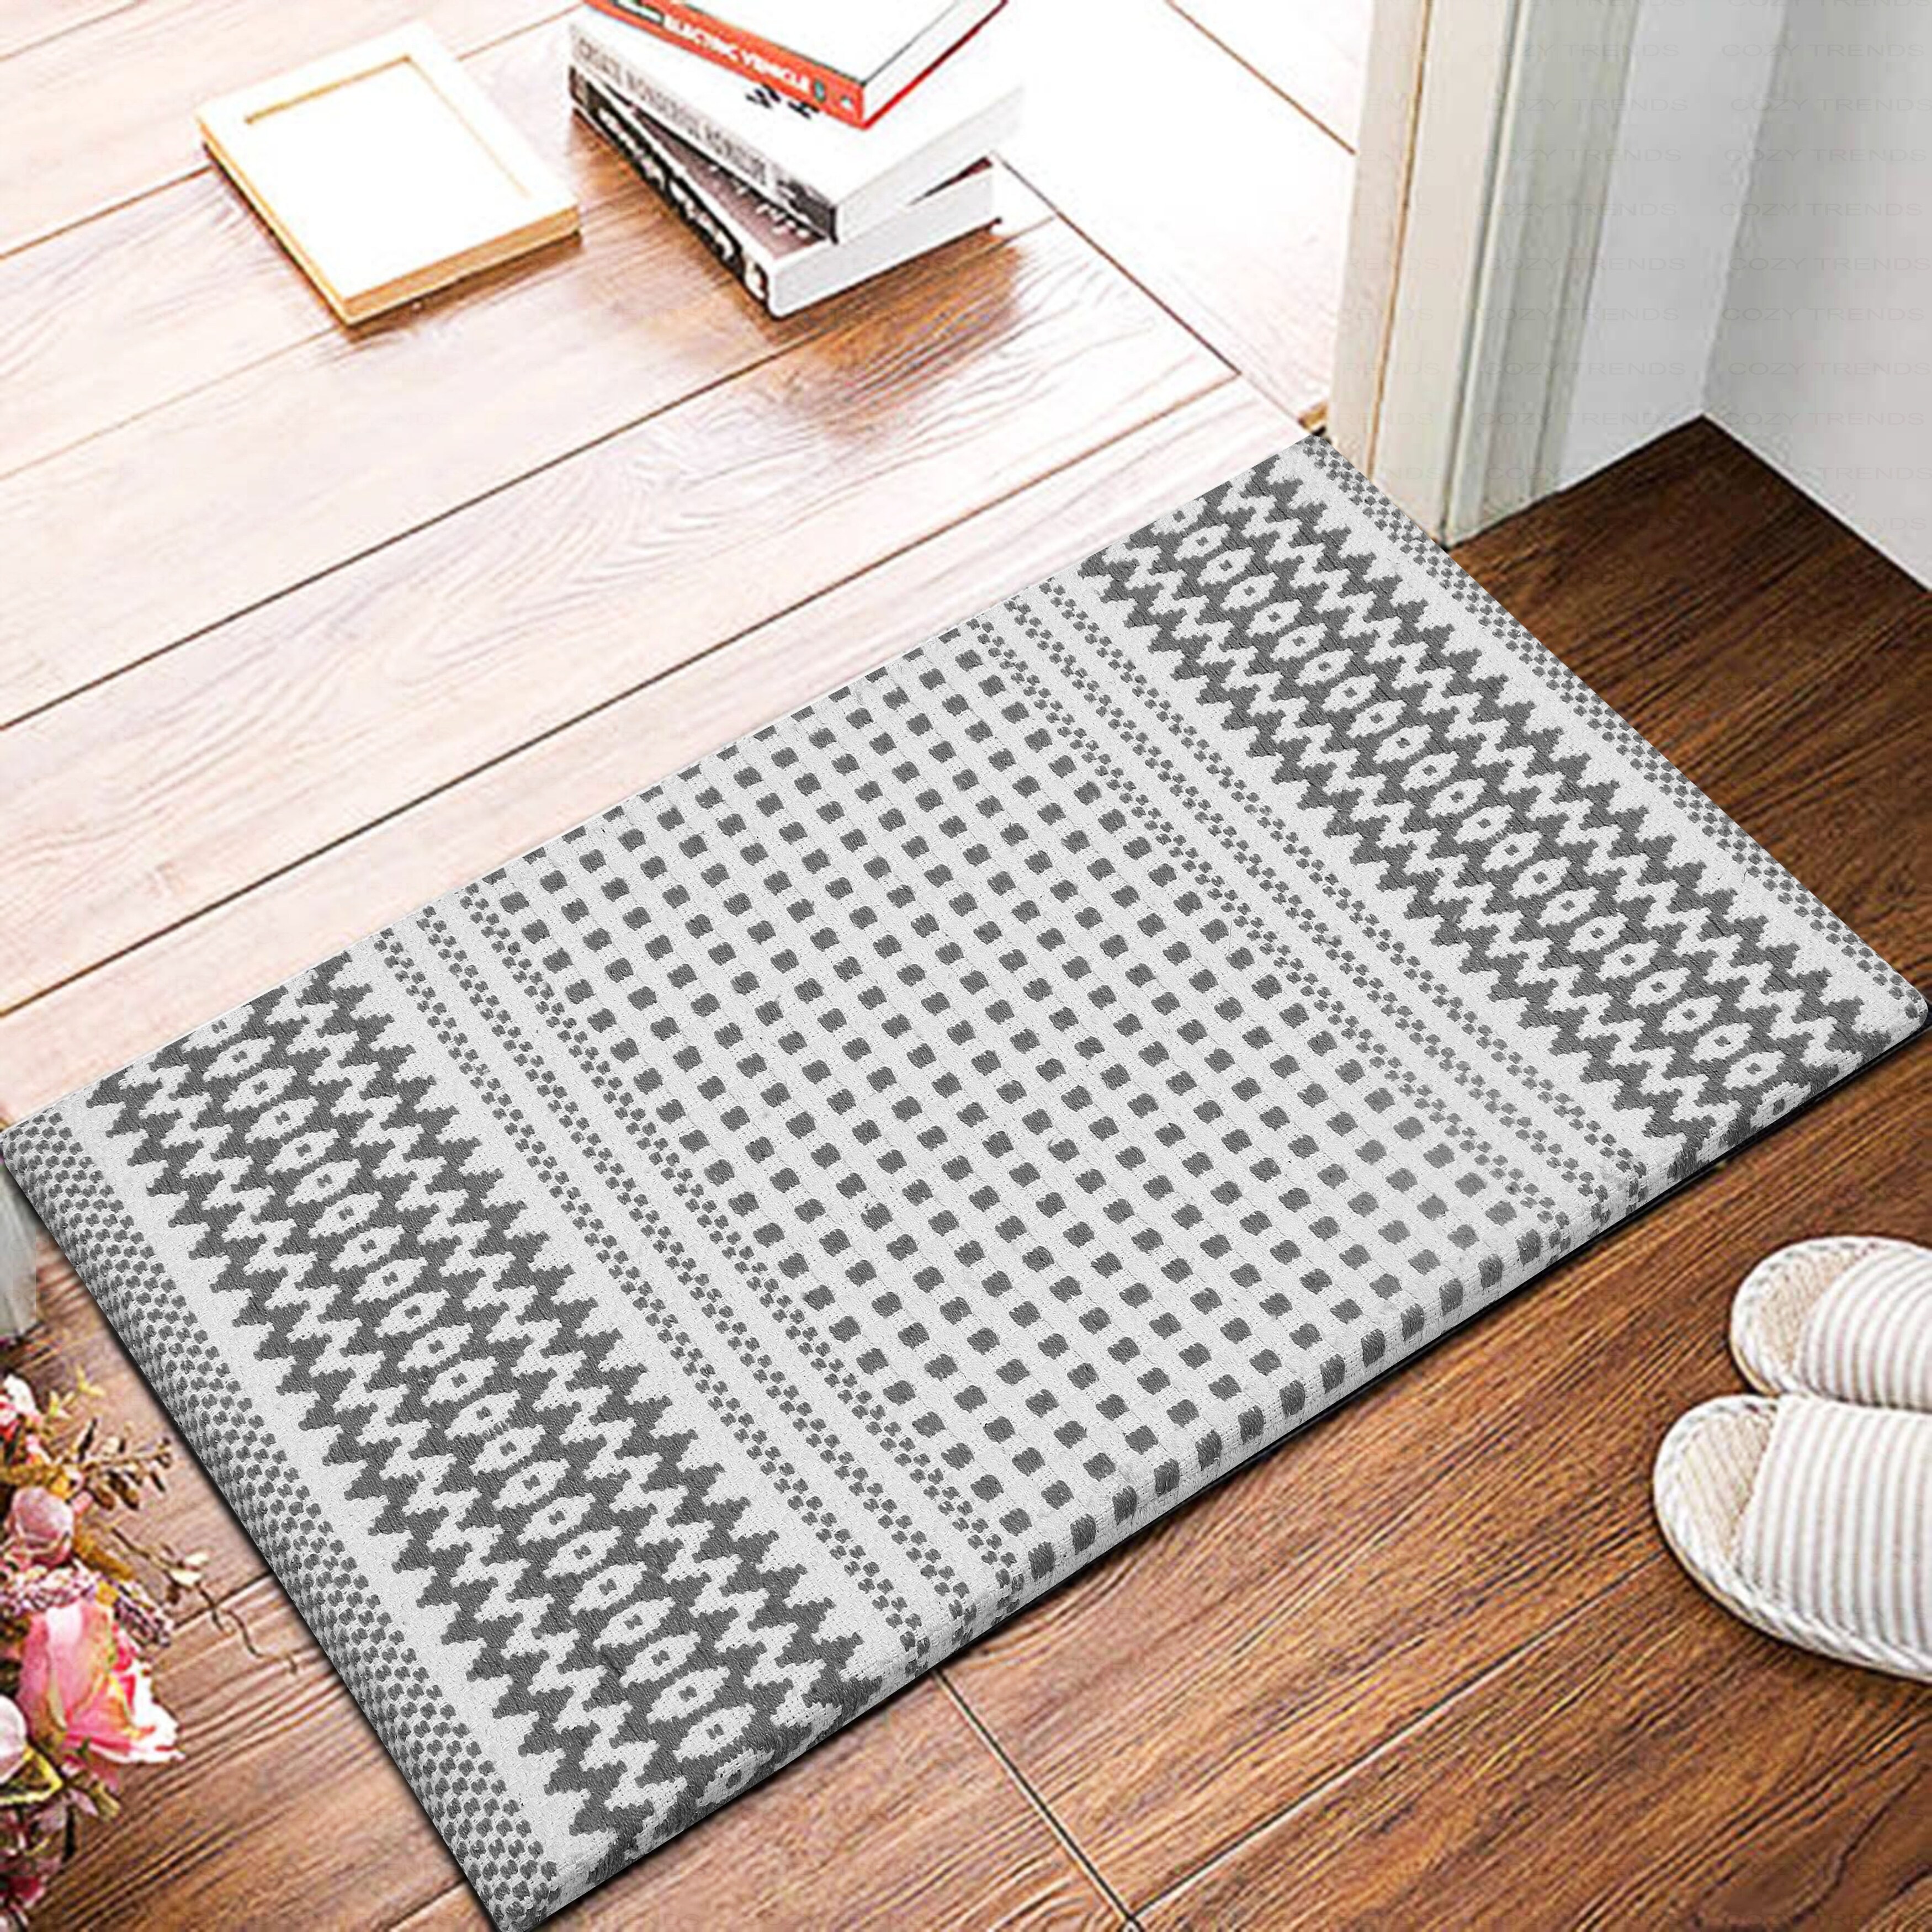 https://ak1.ostkcdn.com/images/products/is/images/direct/fa571f8910005ab9fa148853a75069dec8c58a4e/Woven-Cotton-Anti-Fatigue-Cushioned-Kitchen-%7C-Doormat-%7C-Bathroom-18%22-x-30%22-Mats-With-Foam-Backing-Anti-Slip.jpg